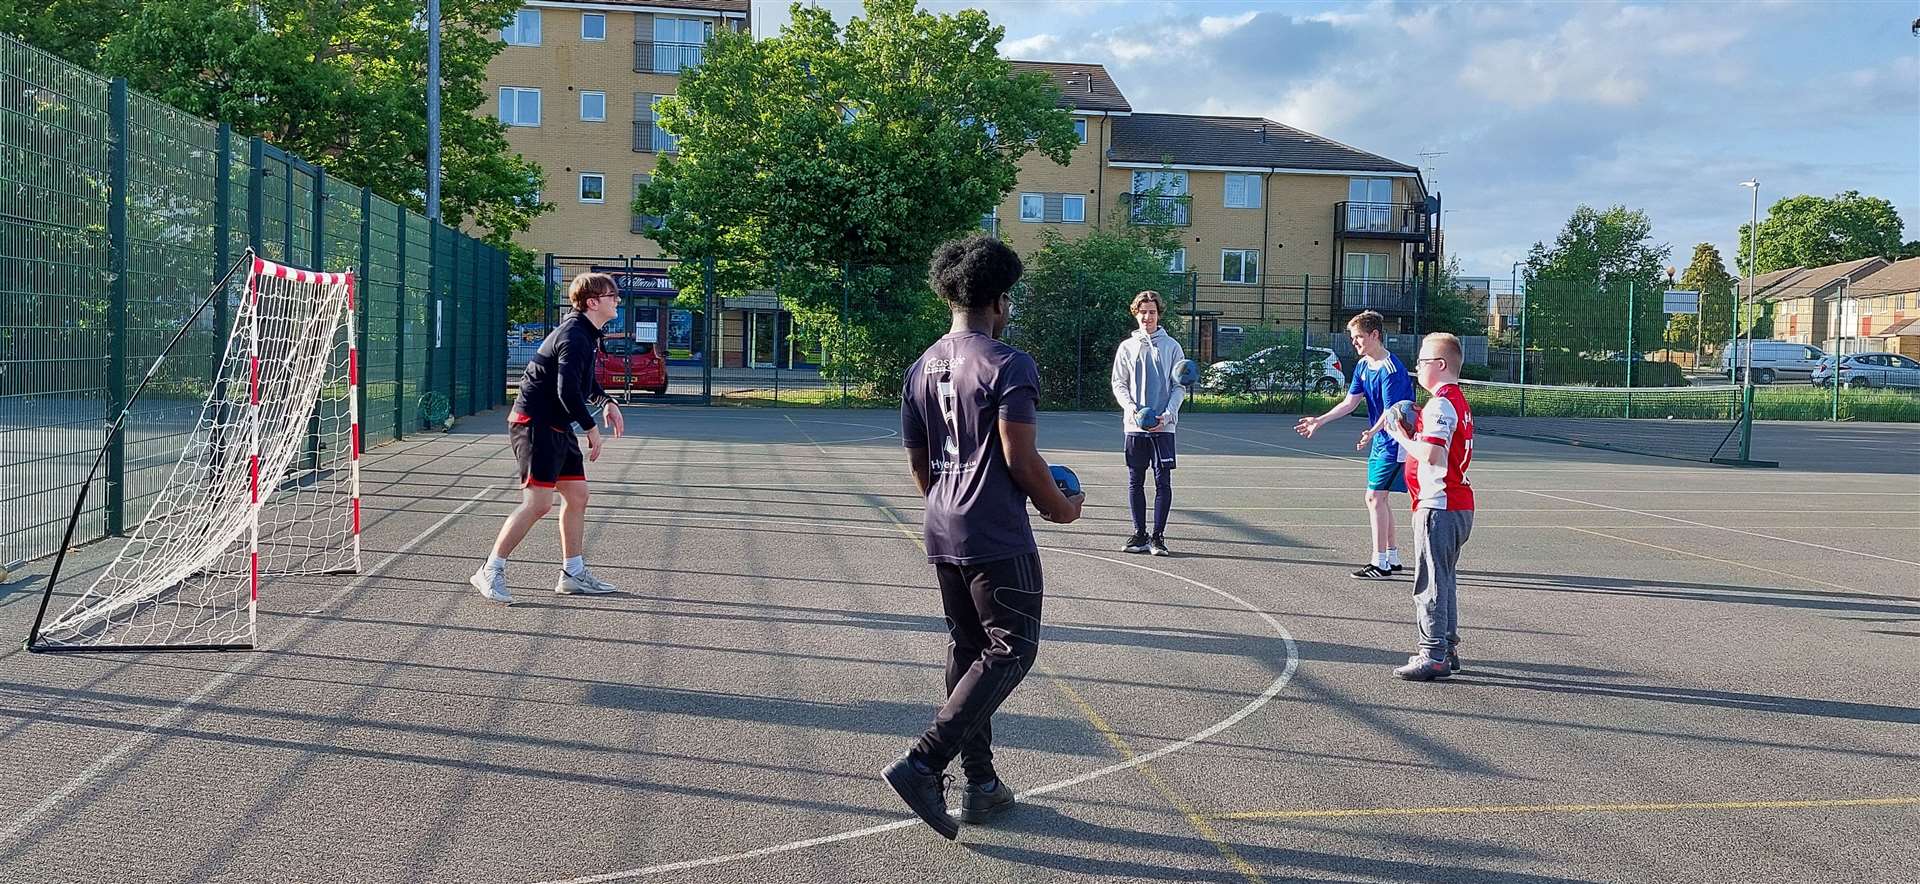 The young people chose which sports to play each week